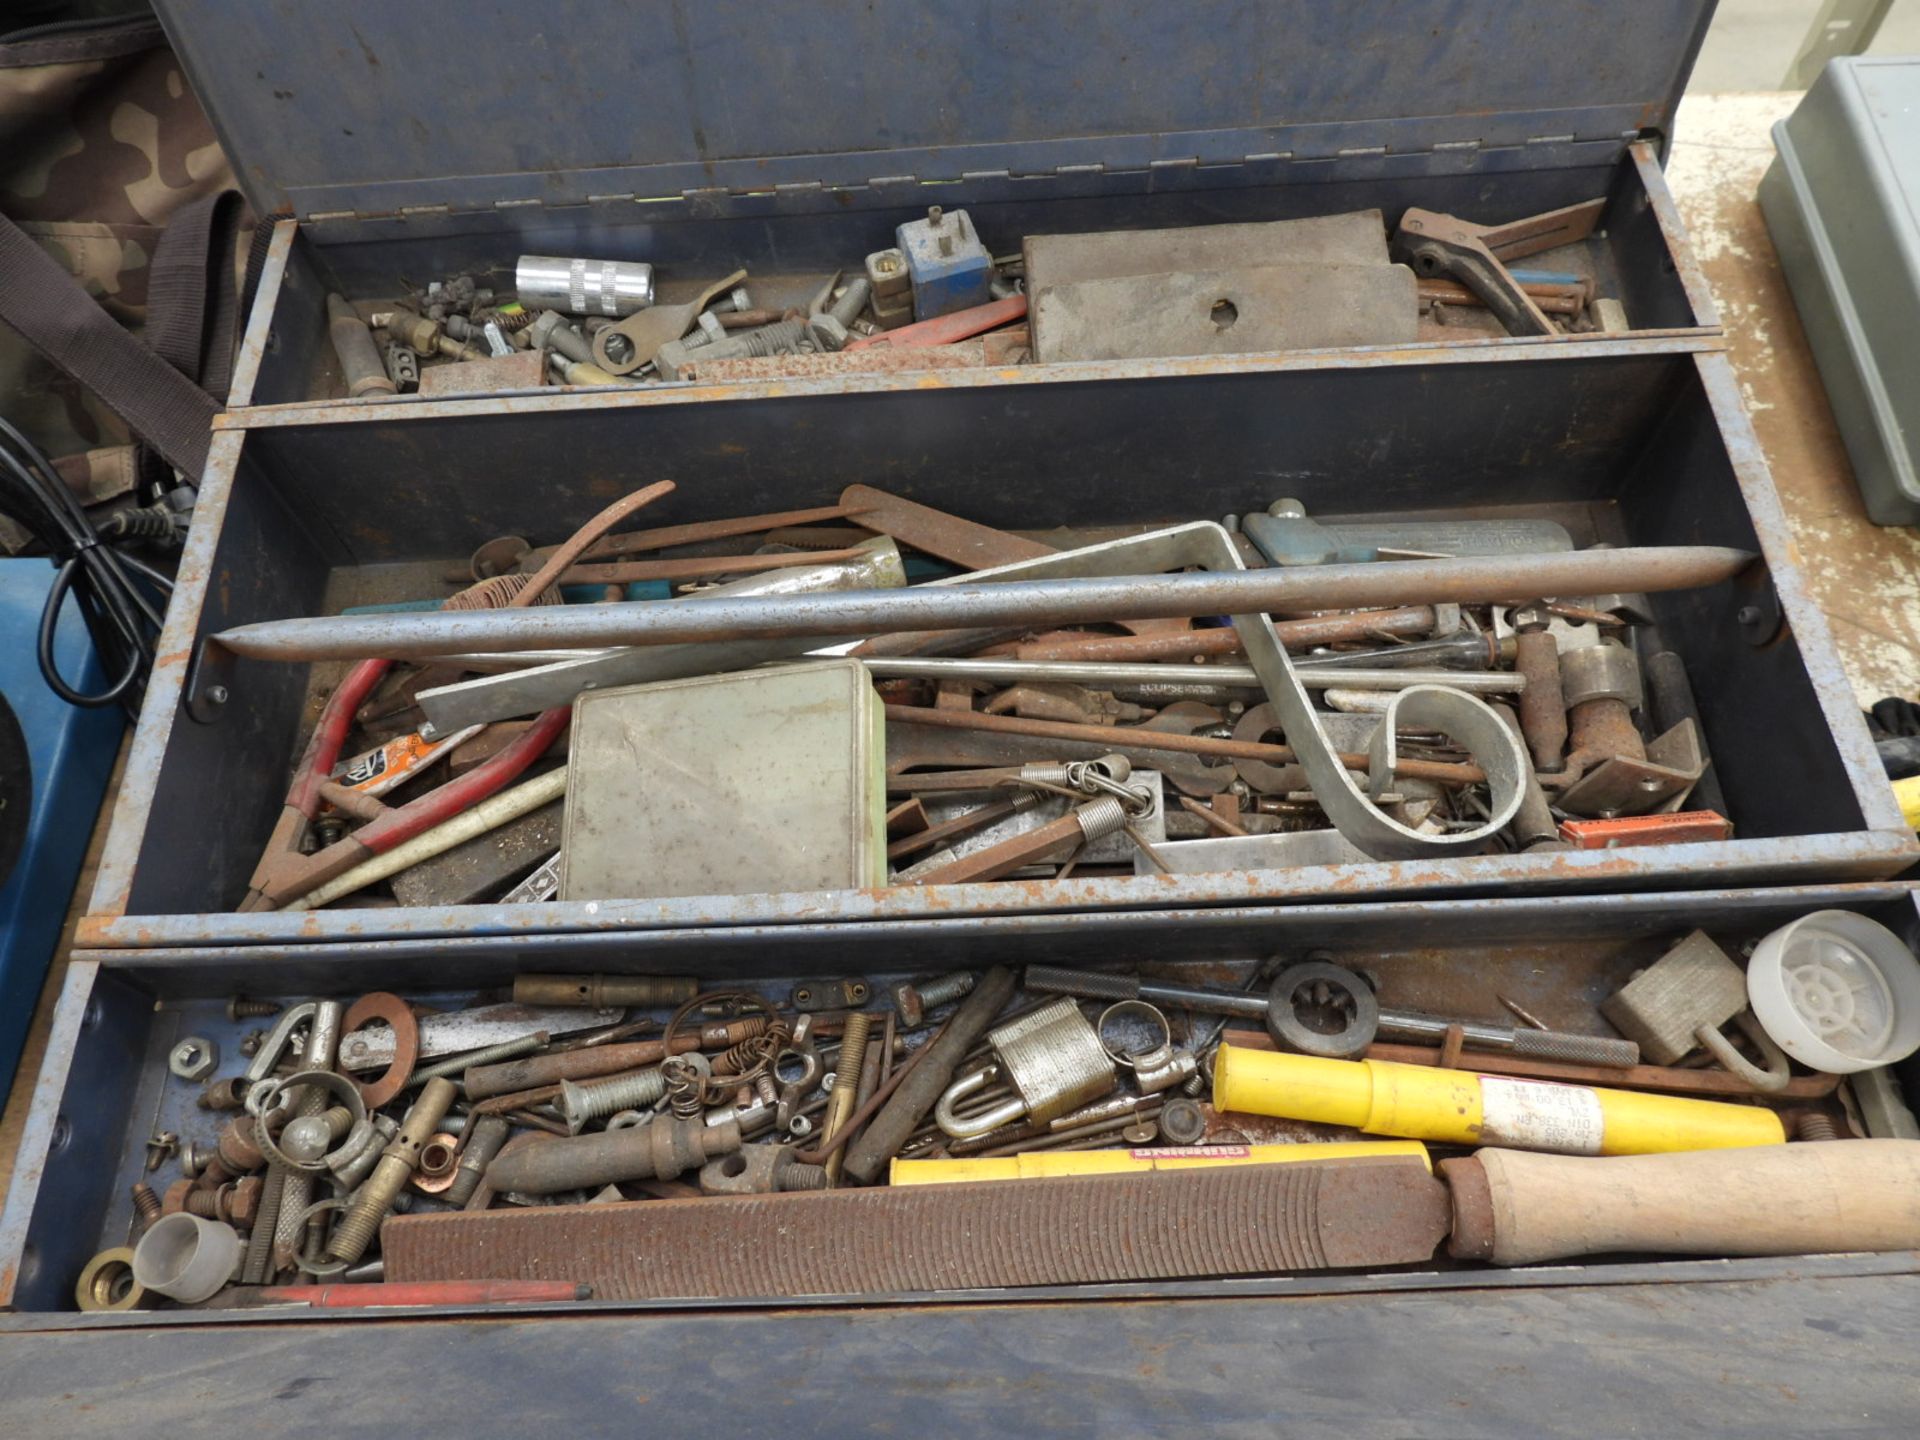 Large blue tool box, containing an assortment of tools